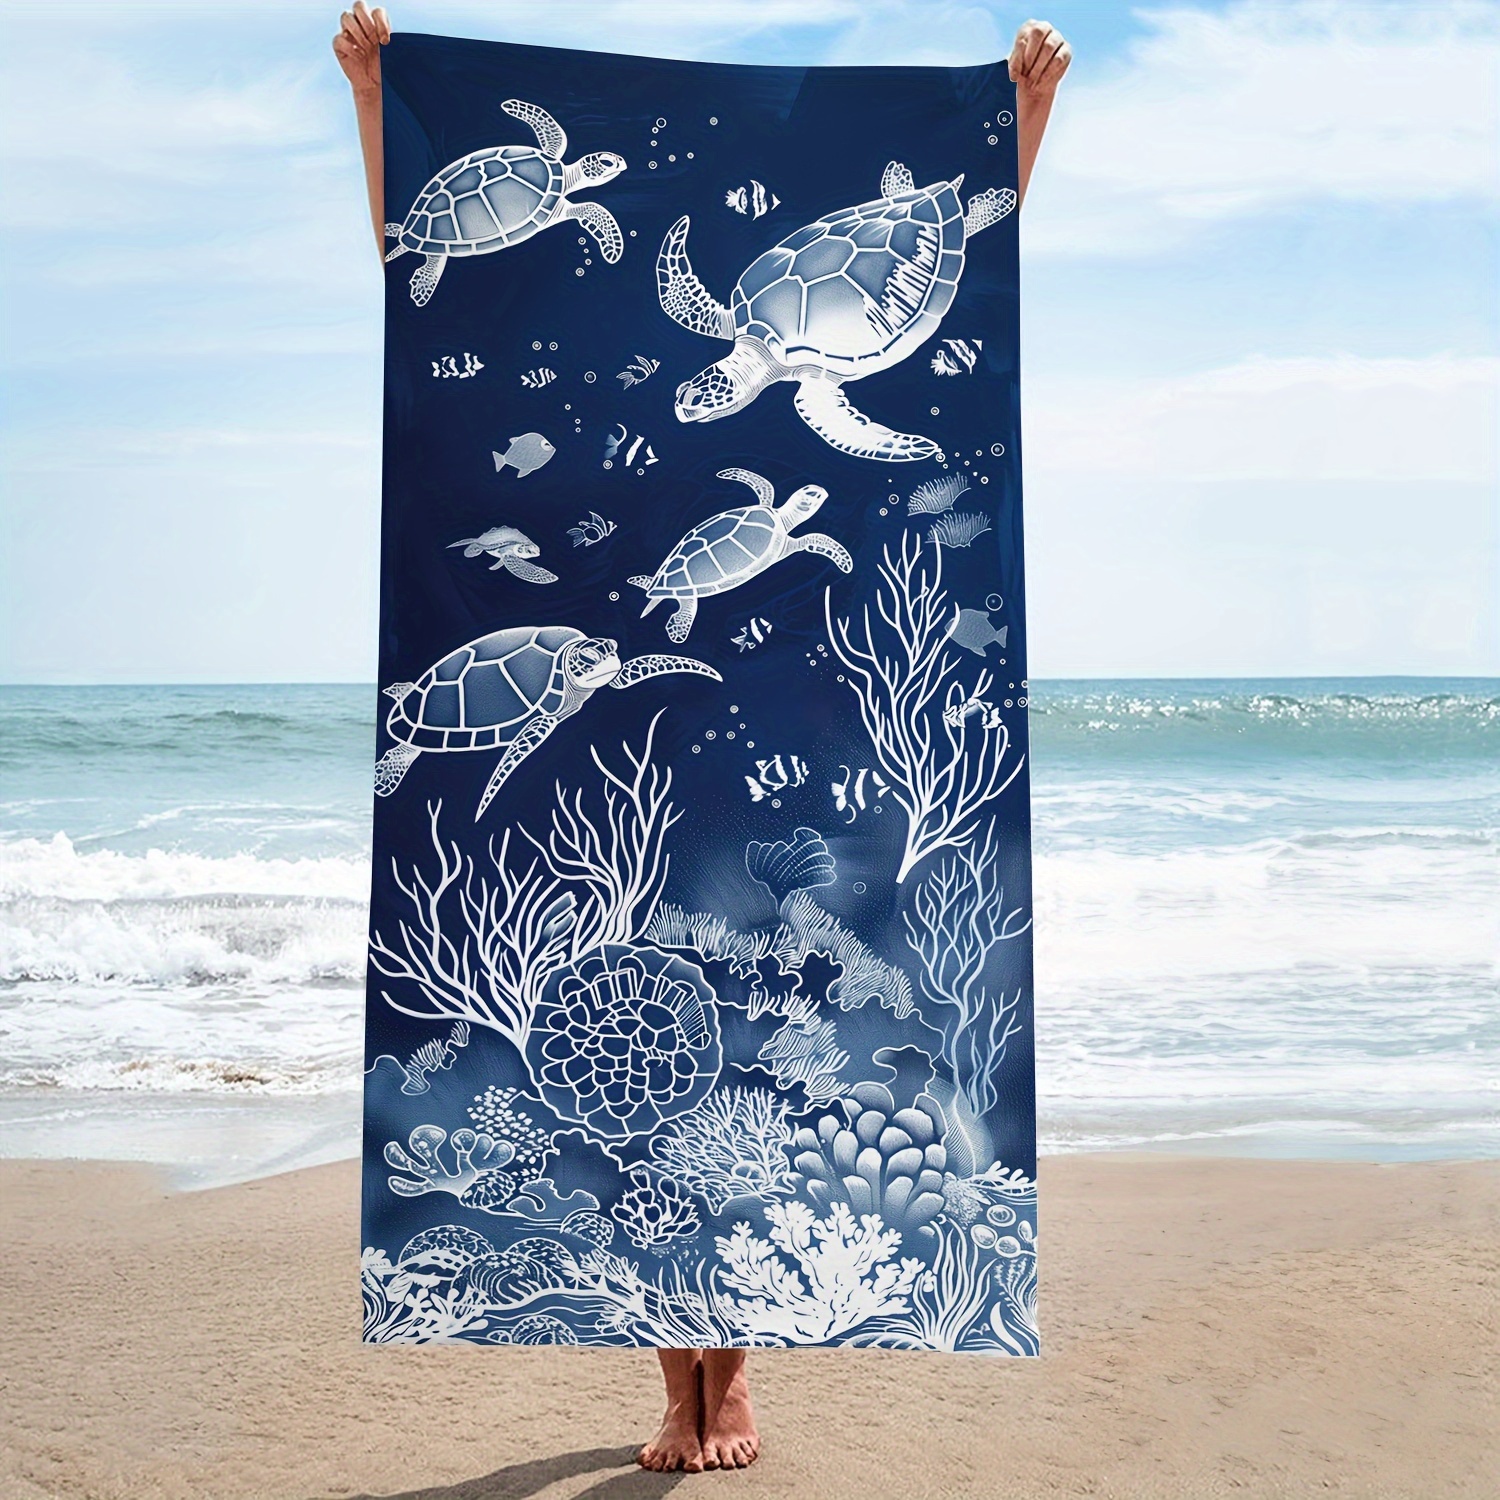 

1pc Retro Microfiber Oversized Beach Towel, Durable Quick Drying Sunscreen Washable Bath Towel, Summer Beach Camping Swimming Pool Travel Essentials